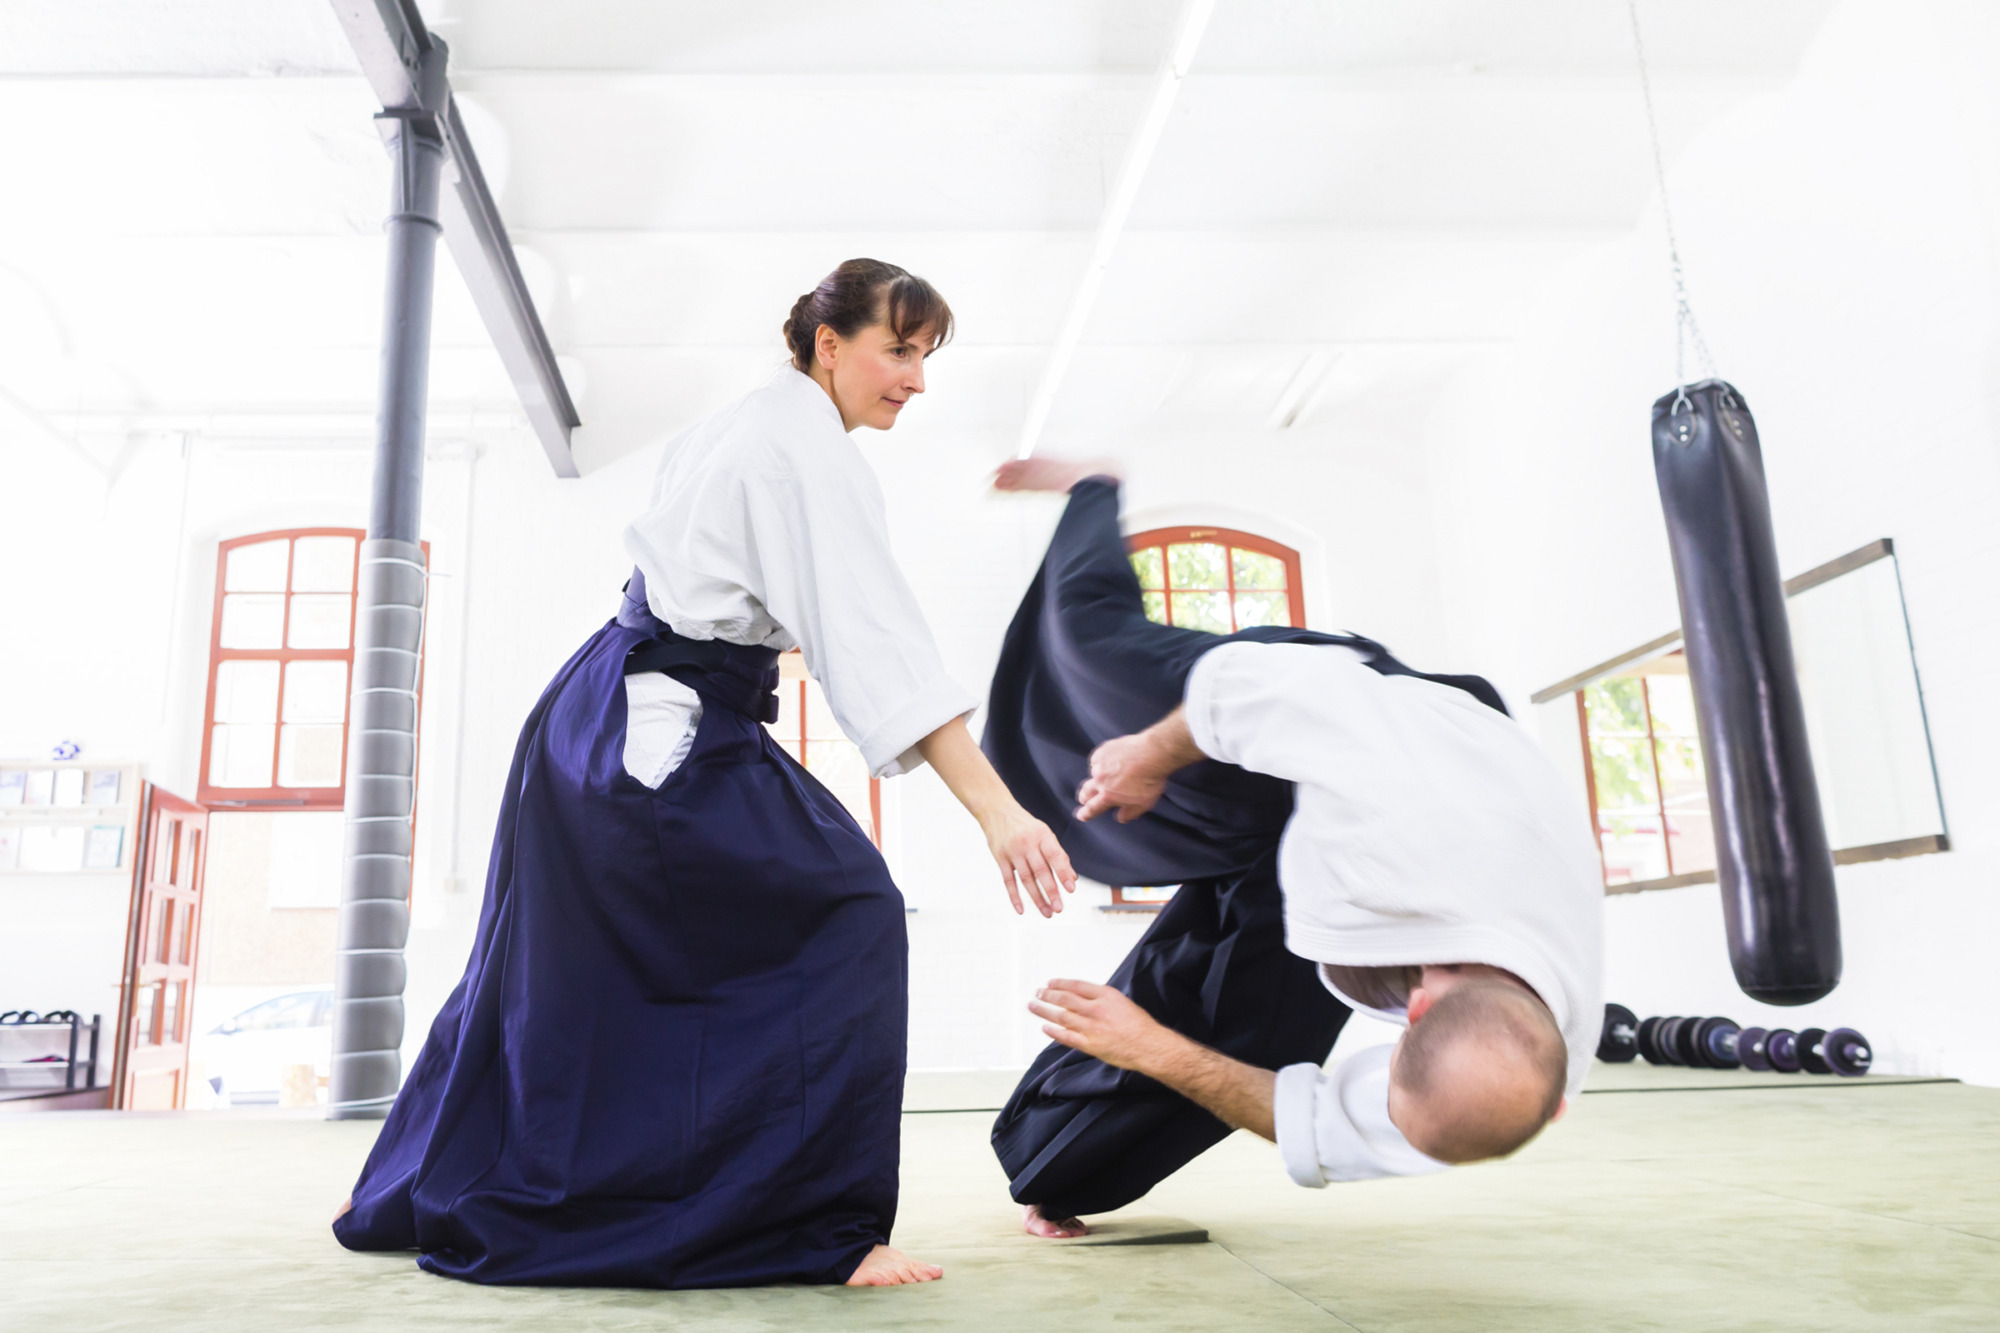 Man And Woman Fighting At Aikido Martial Arts School